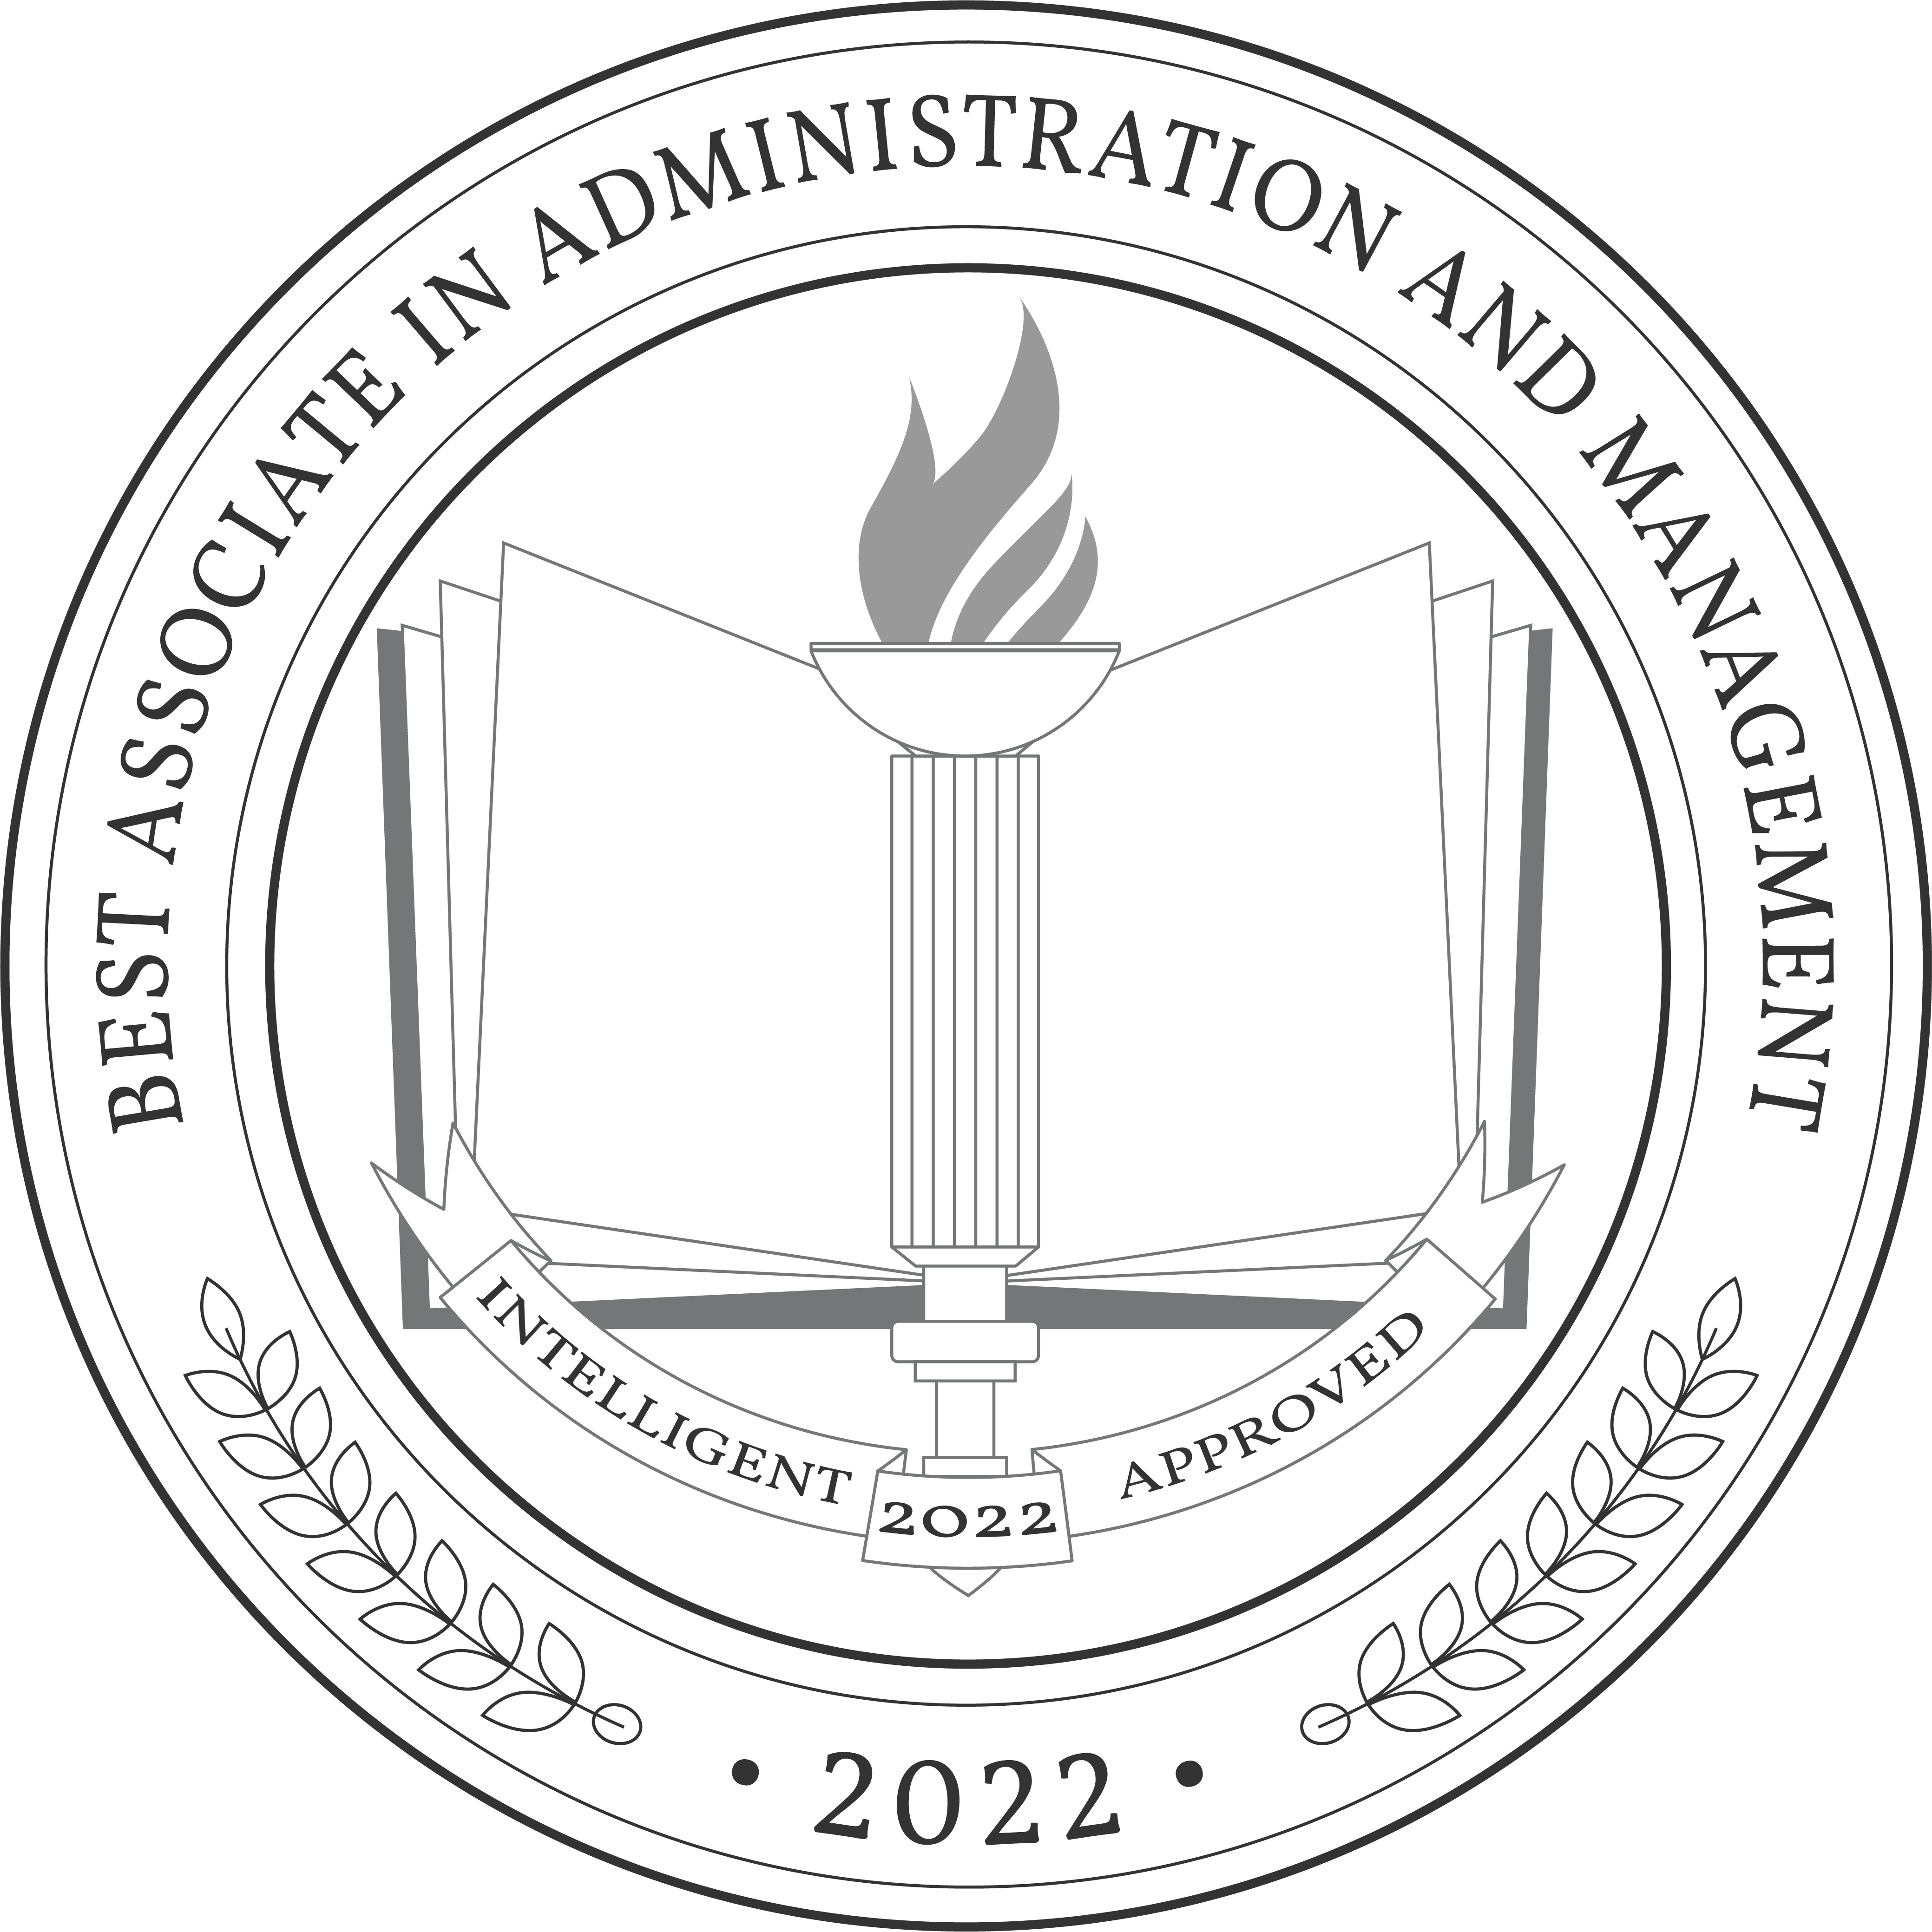 Best-Associate-in-Administration-and-Management-Badge-1.png